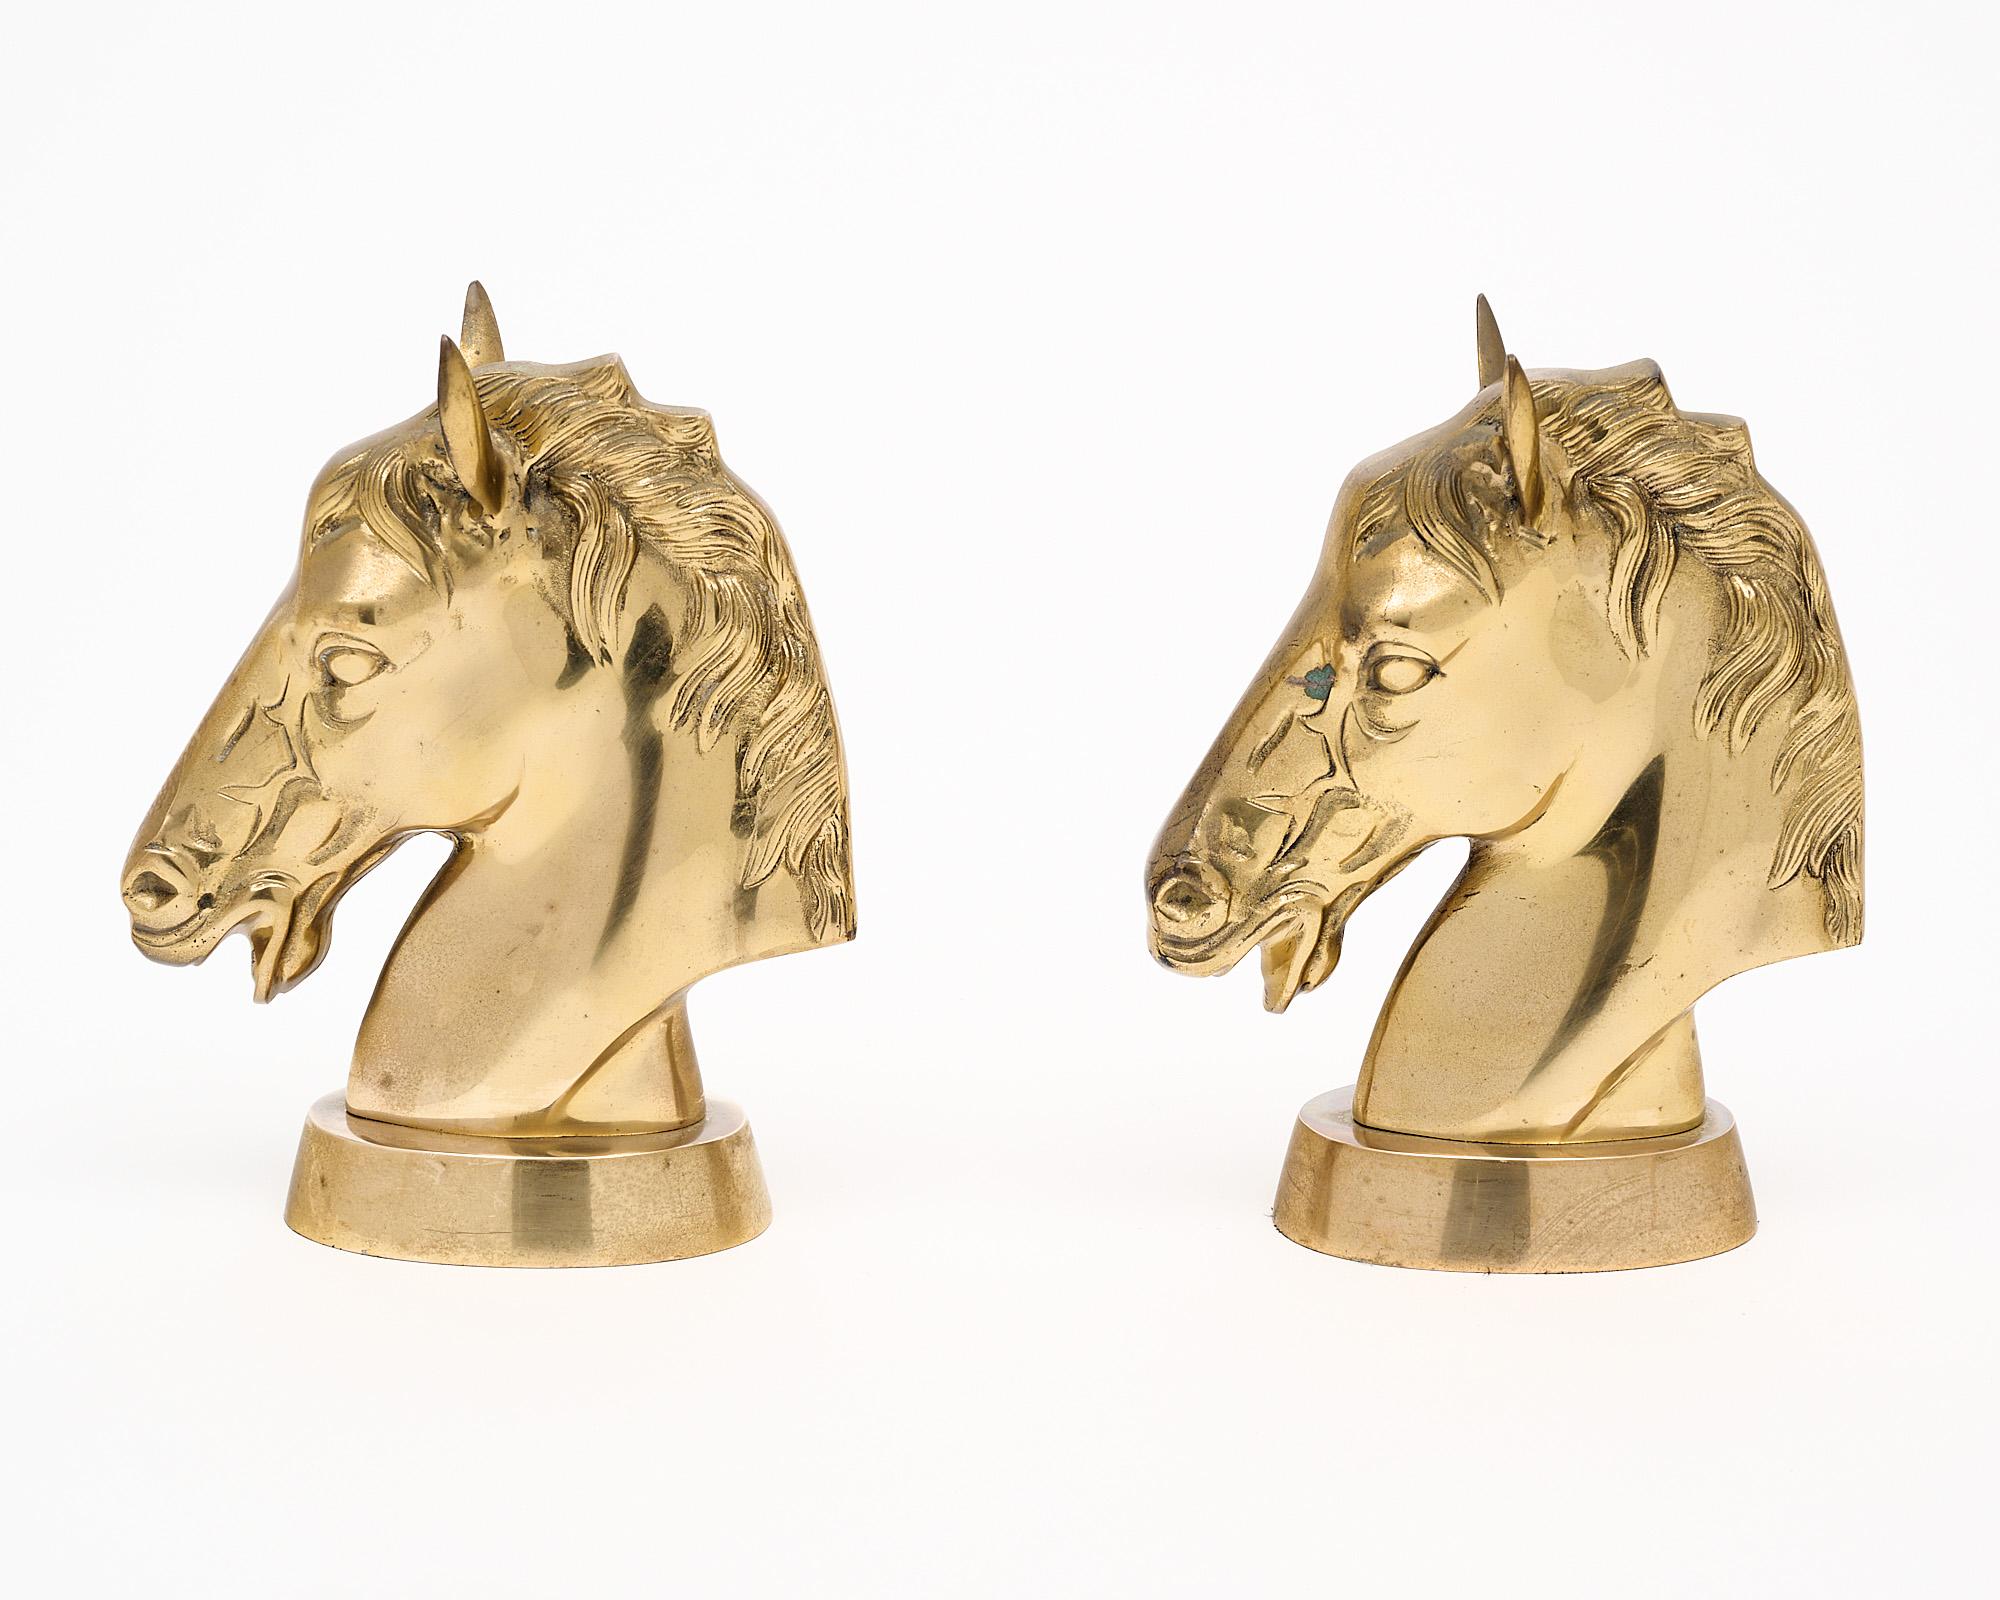 Pair of bookends made of molded brass in the shape of horse heads. This vintage pair is in excellent condition and are in the style of renowned French design house Maison Charles.